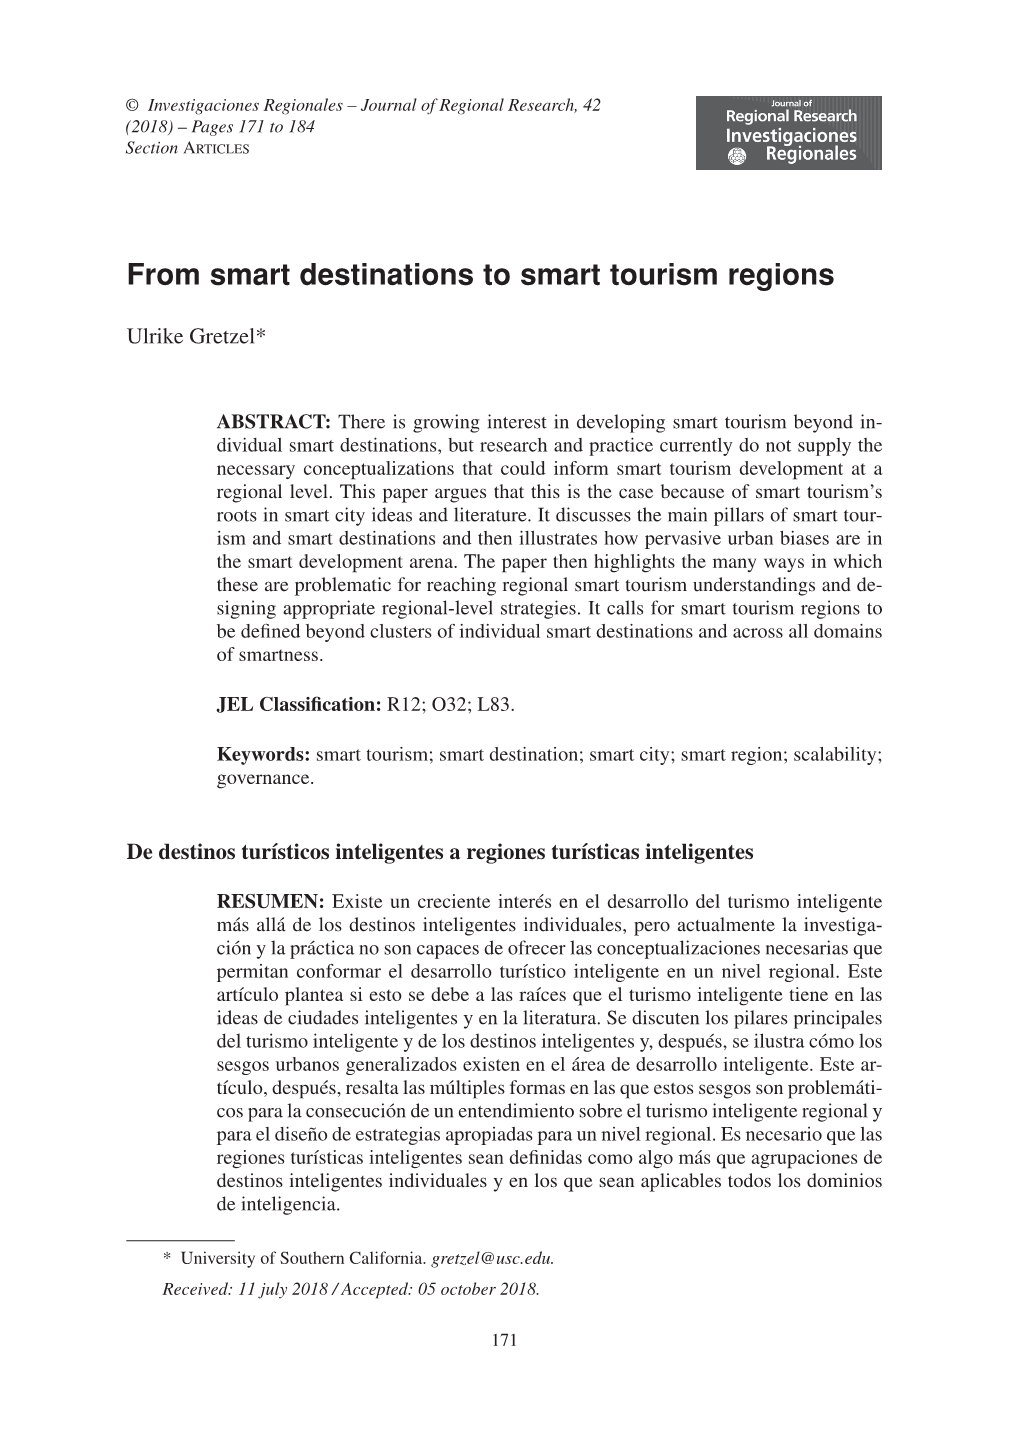 From Smart Destinations to Smart Tourism Regions